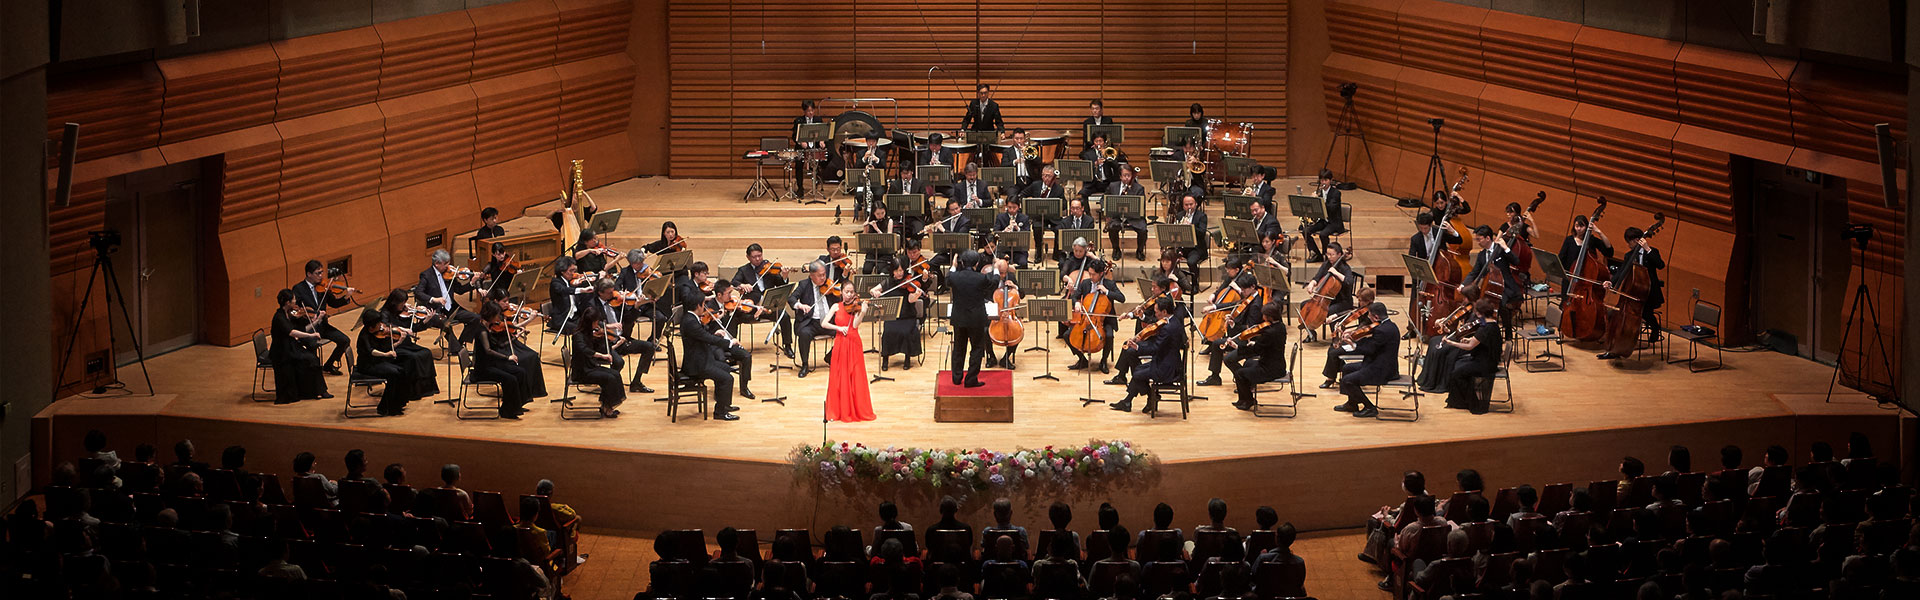 310th Japan Philharmonic Orchestra Subscription Concert | Sendai International Music Competition Official Website